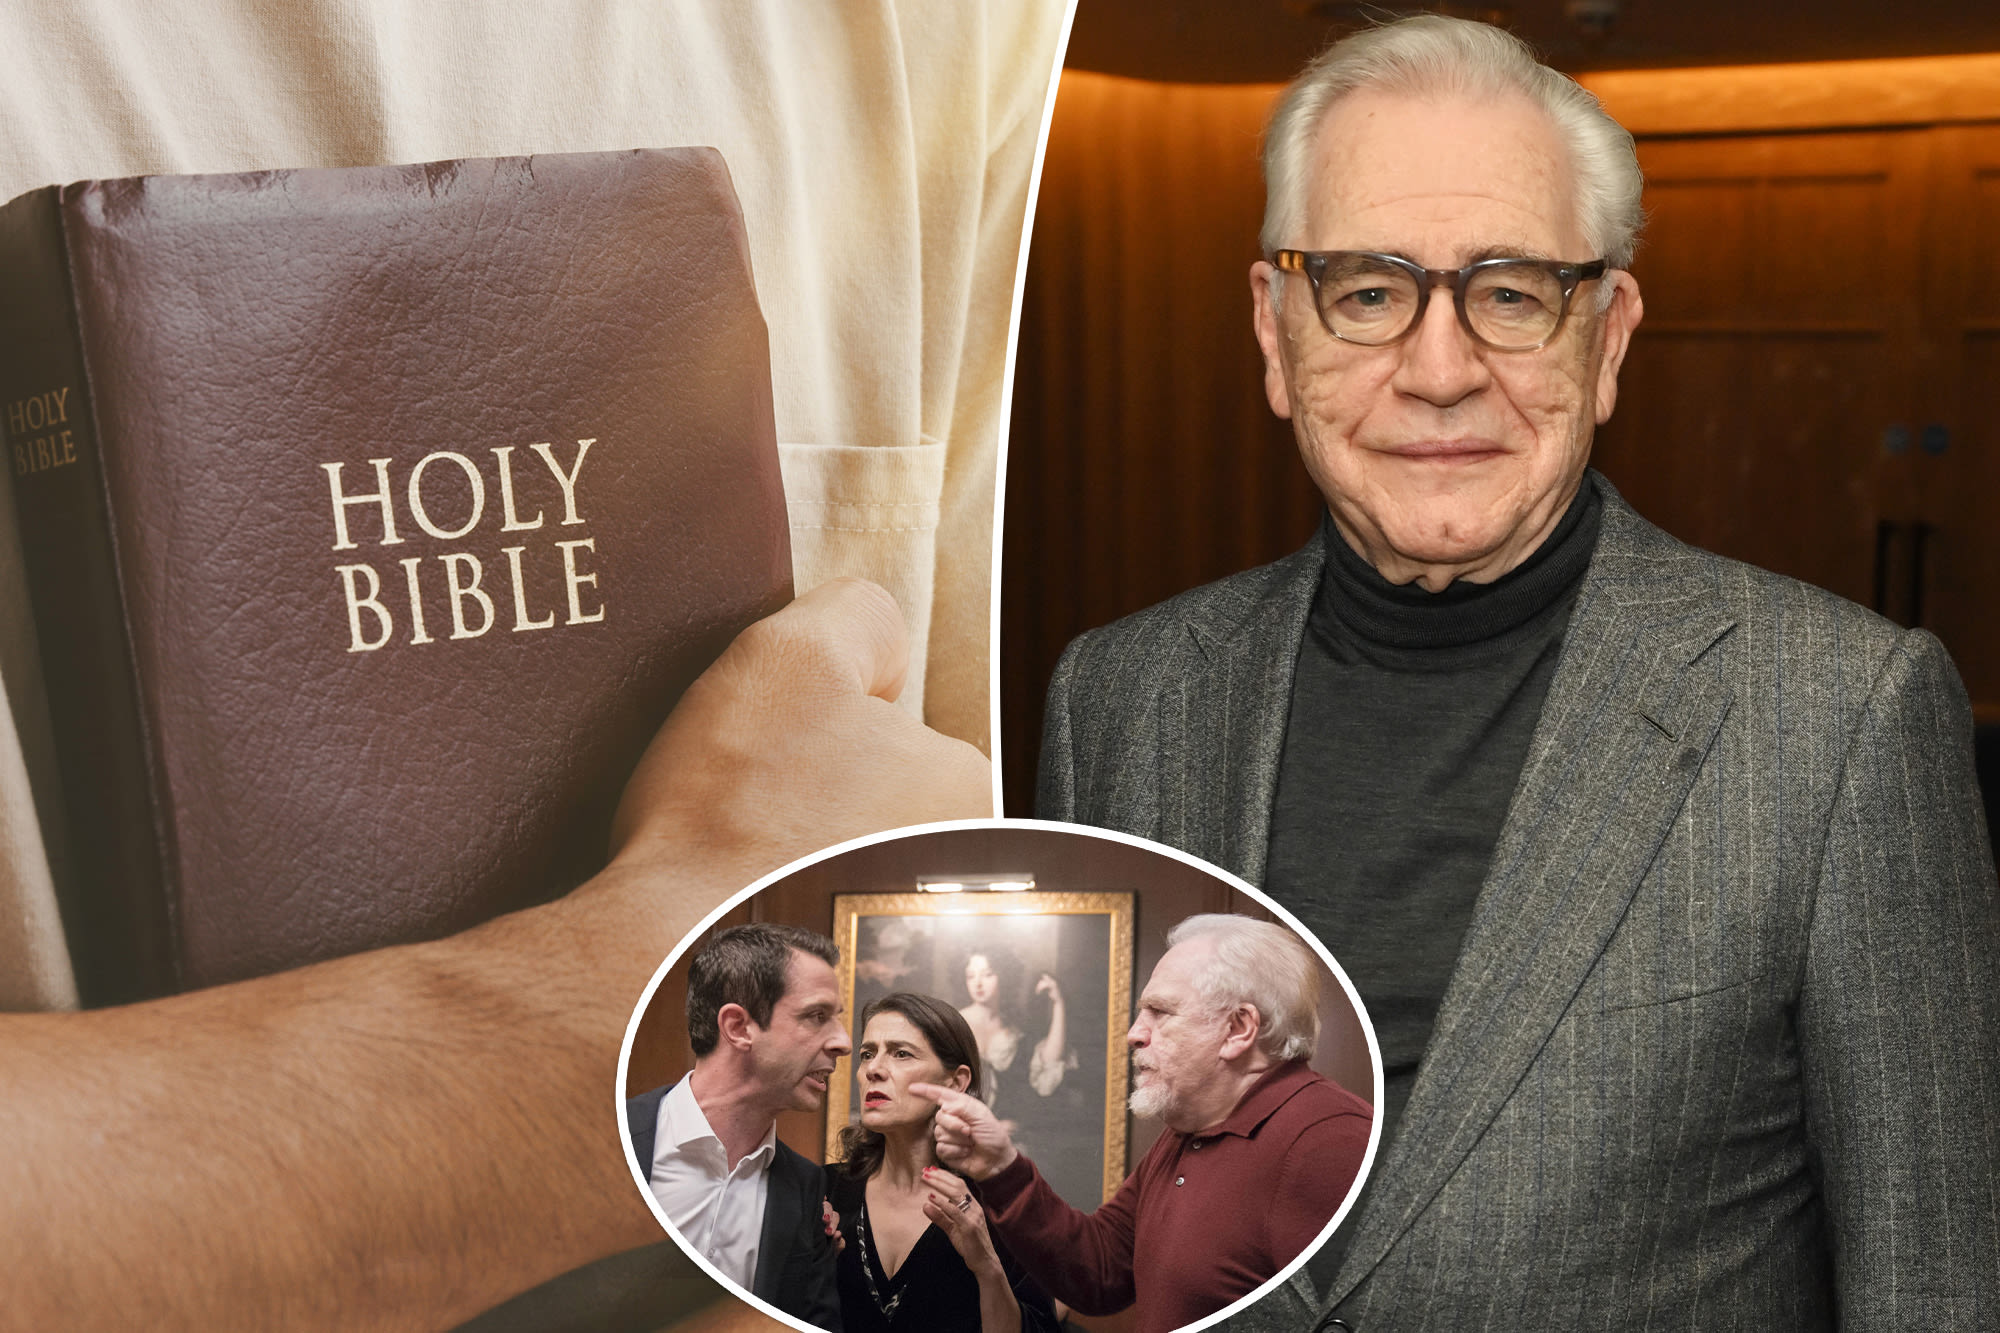 Brian Cox slams the Bible as ‘one of the worst books ever’: ‘Stupid’ people believe it